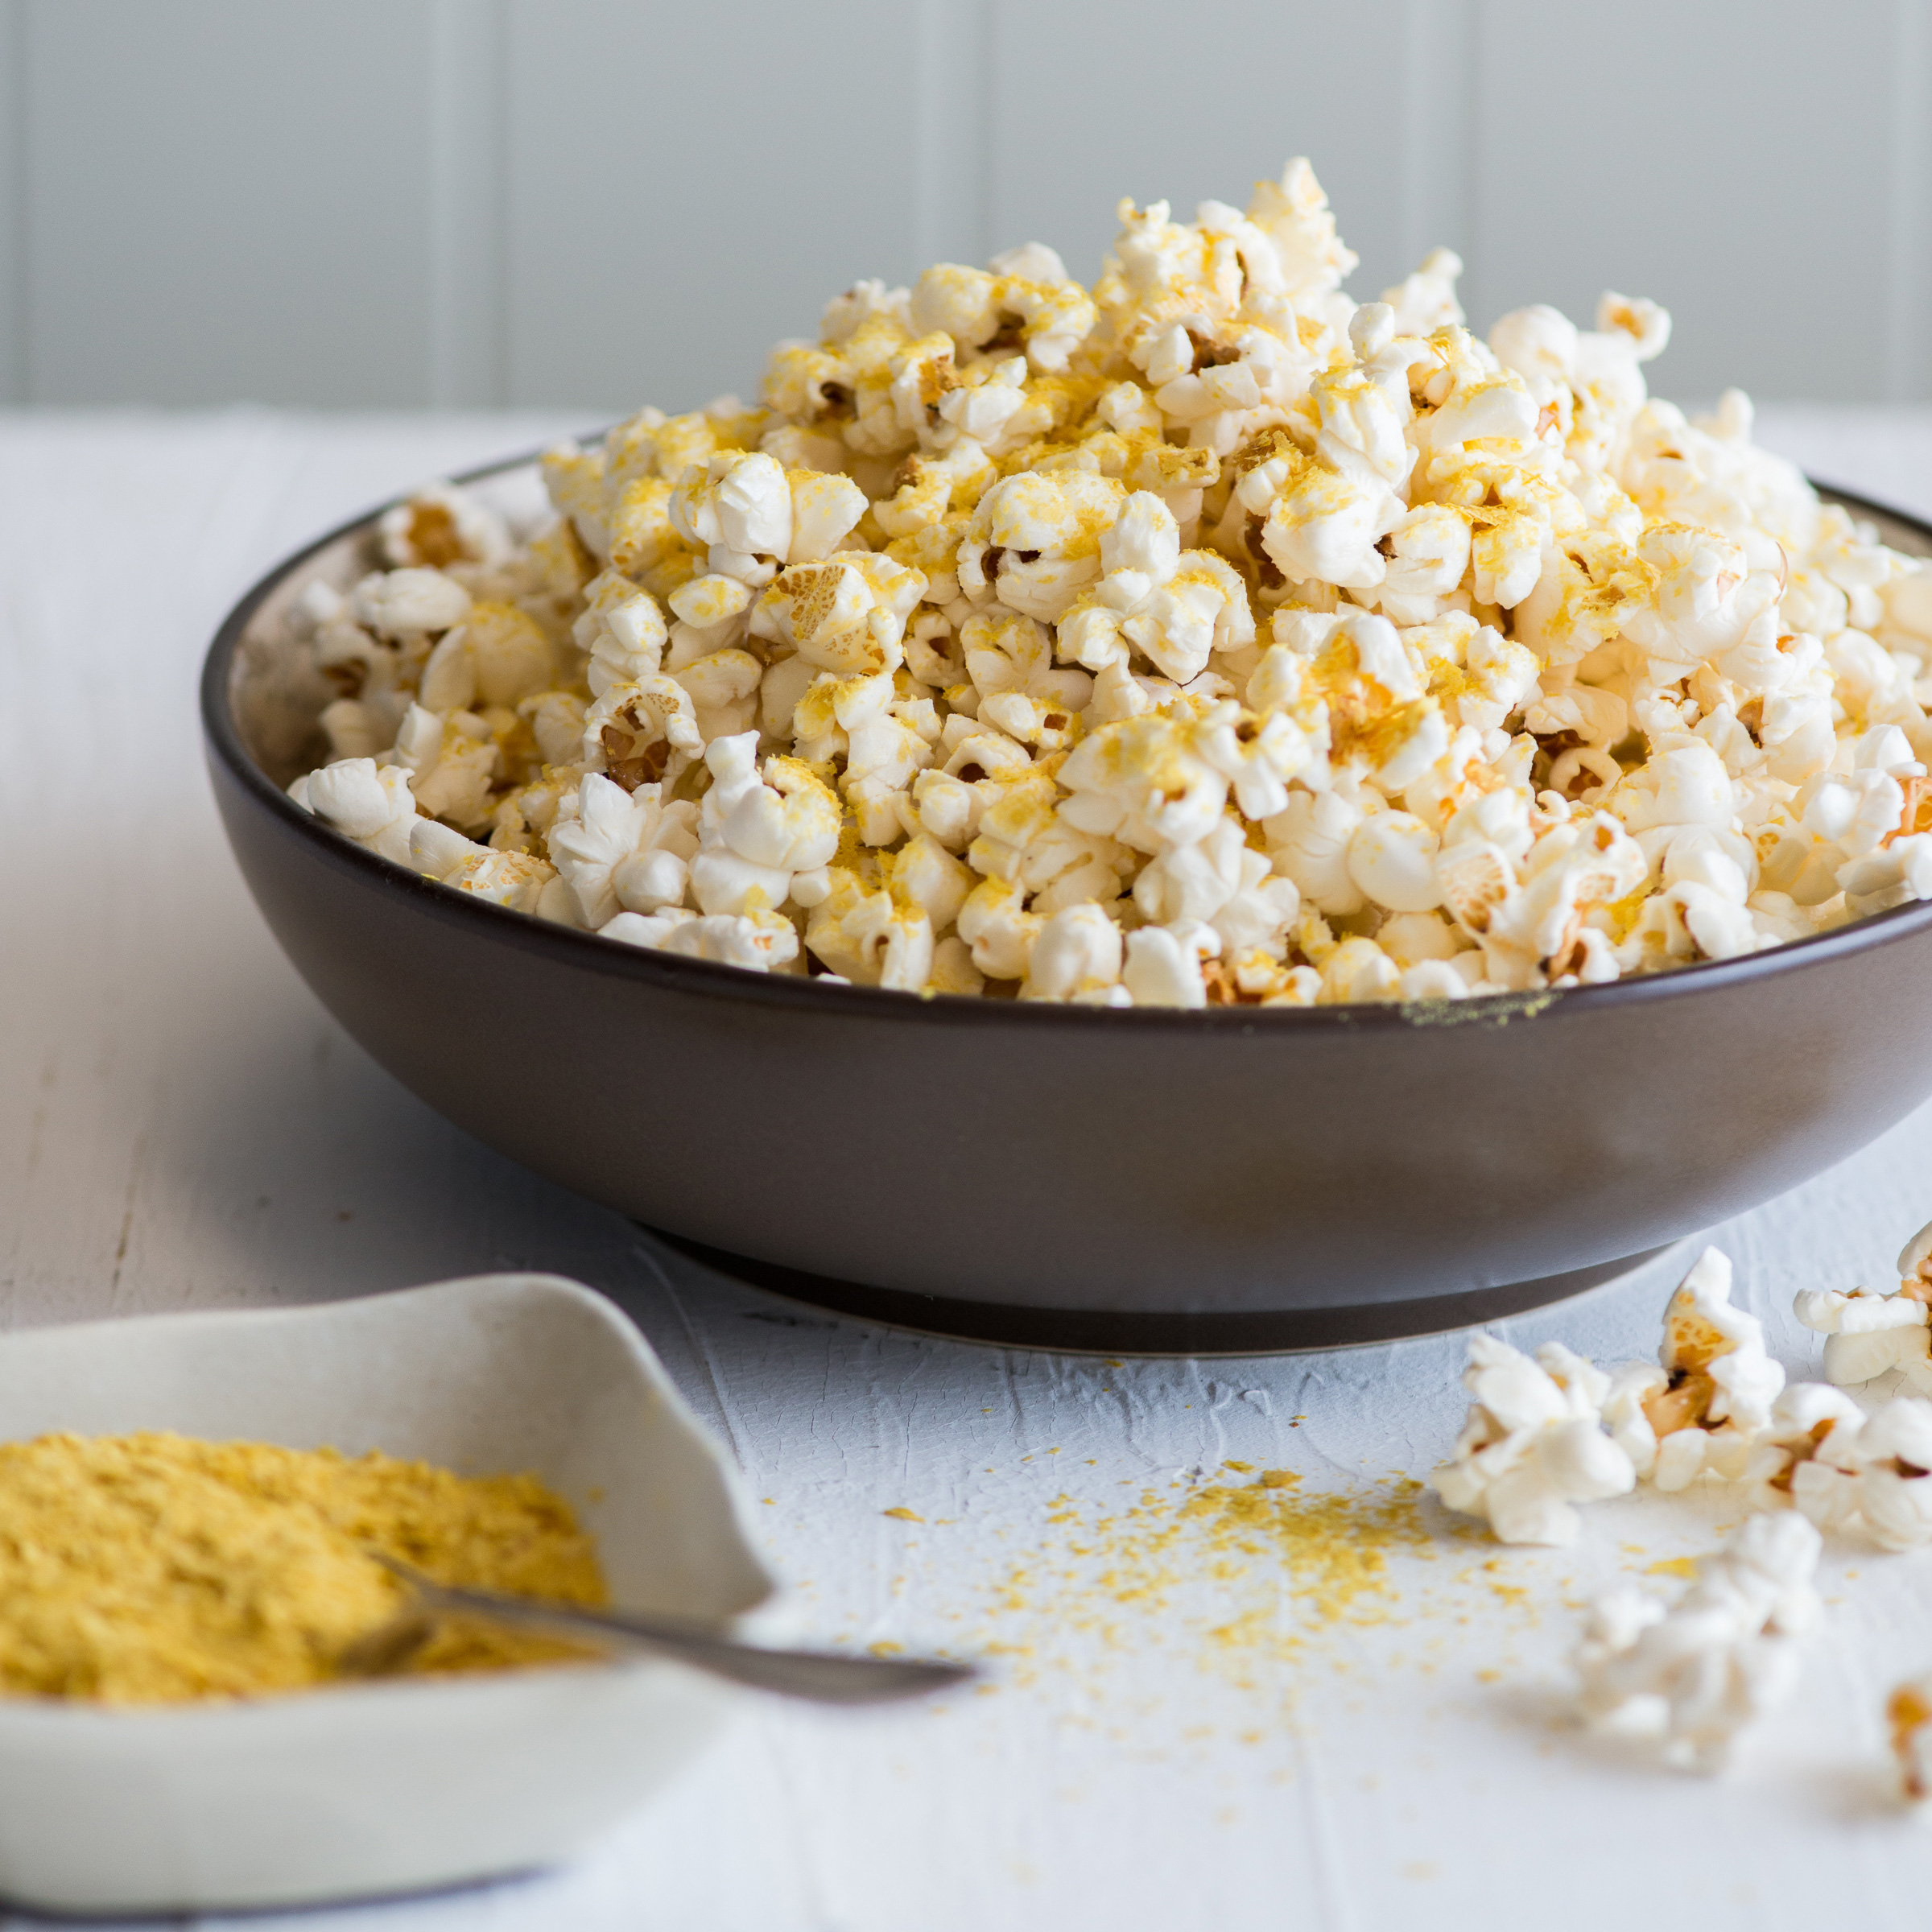 A big bowl of popcorn and a small bowl with nutritional yeast on a white table